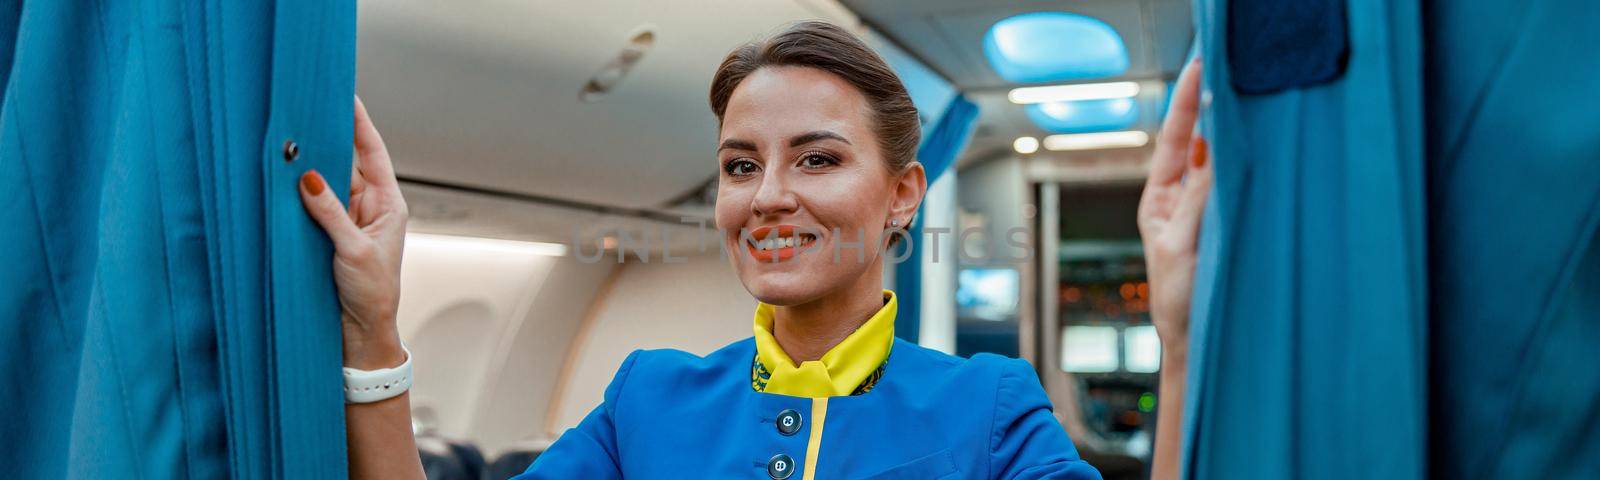 Cheerful flight attendant in air hostess uniform looking at camera and smiling while holding drapes in aircraft passenger salon